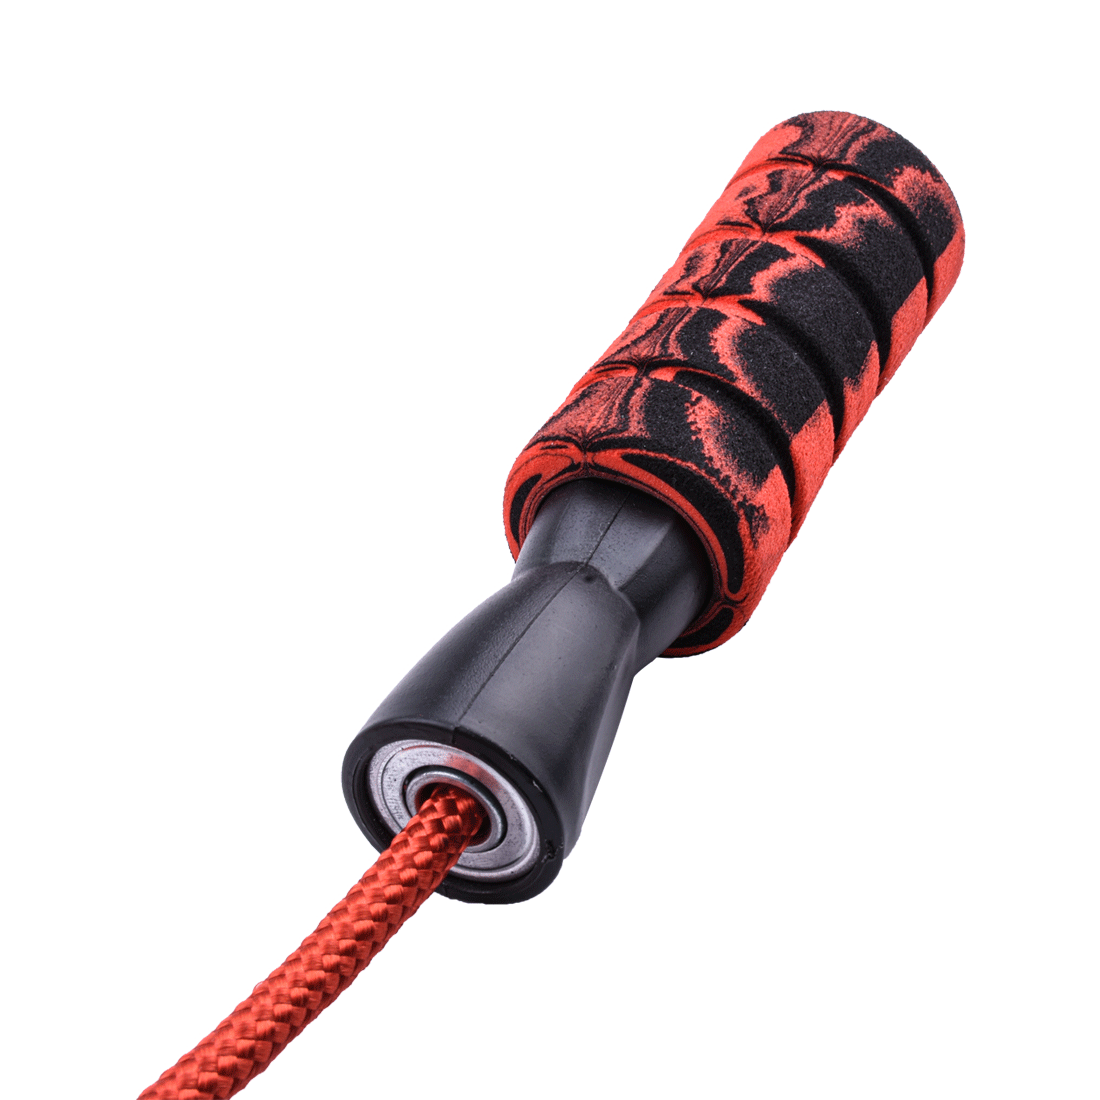 Jumping Rope Skipping Rope Weight Fitness Exercise Workout Boxing MMA Training Crossfit Men Women Kids Home Gym Equipment